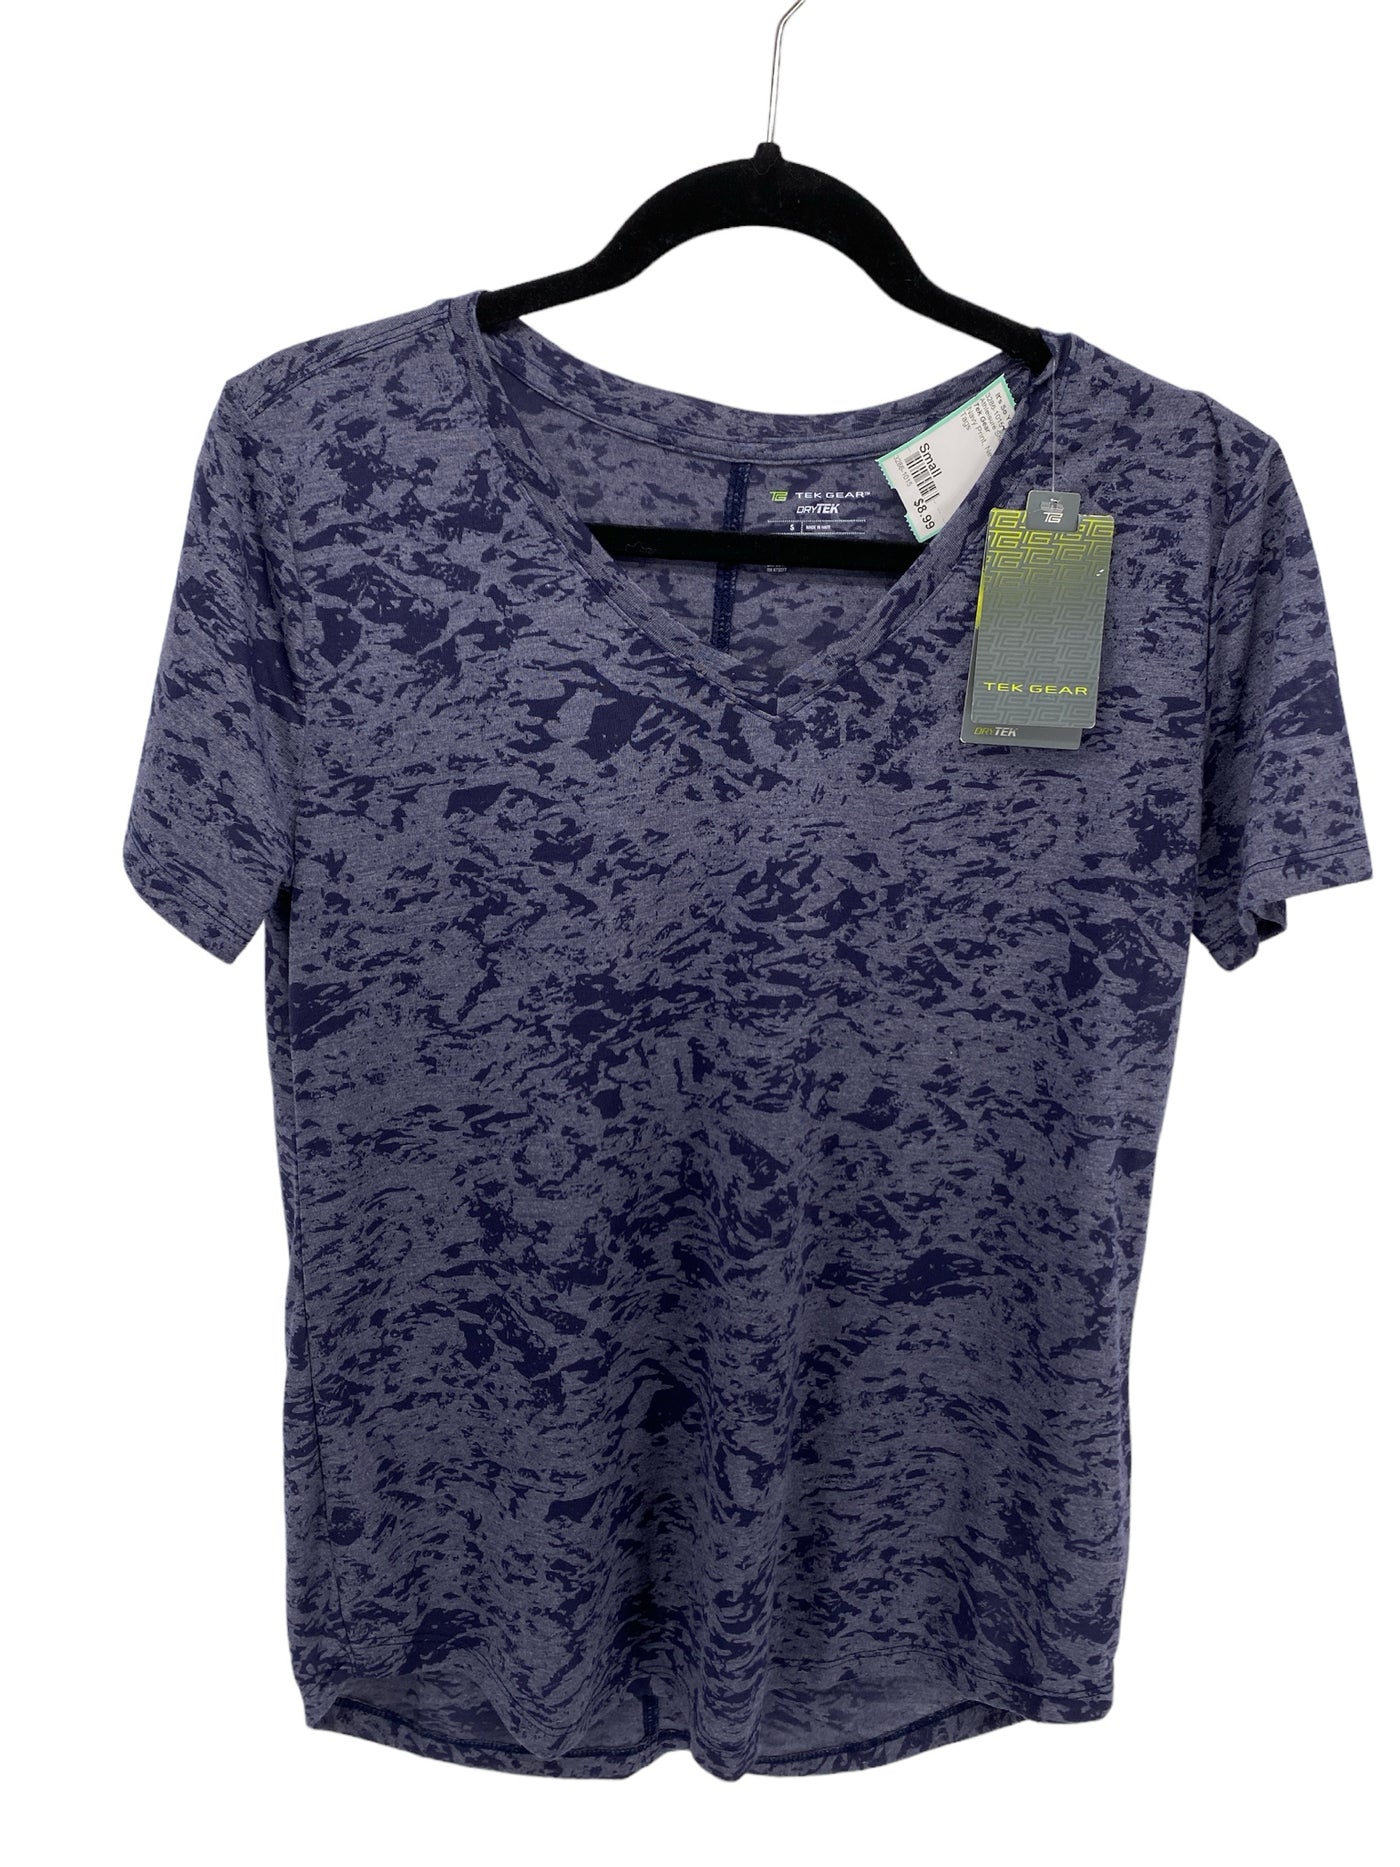 Tek Gear Misses Size Small Navy Print New With Tags Athleisure Short Sleeve